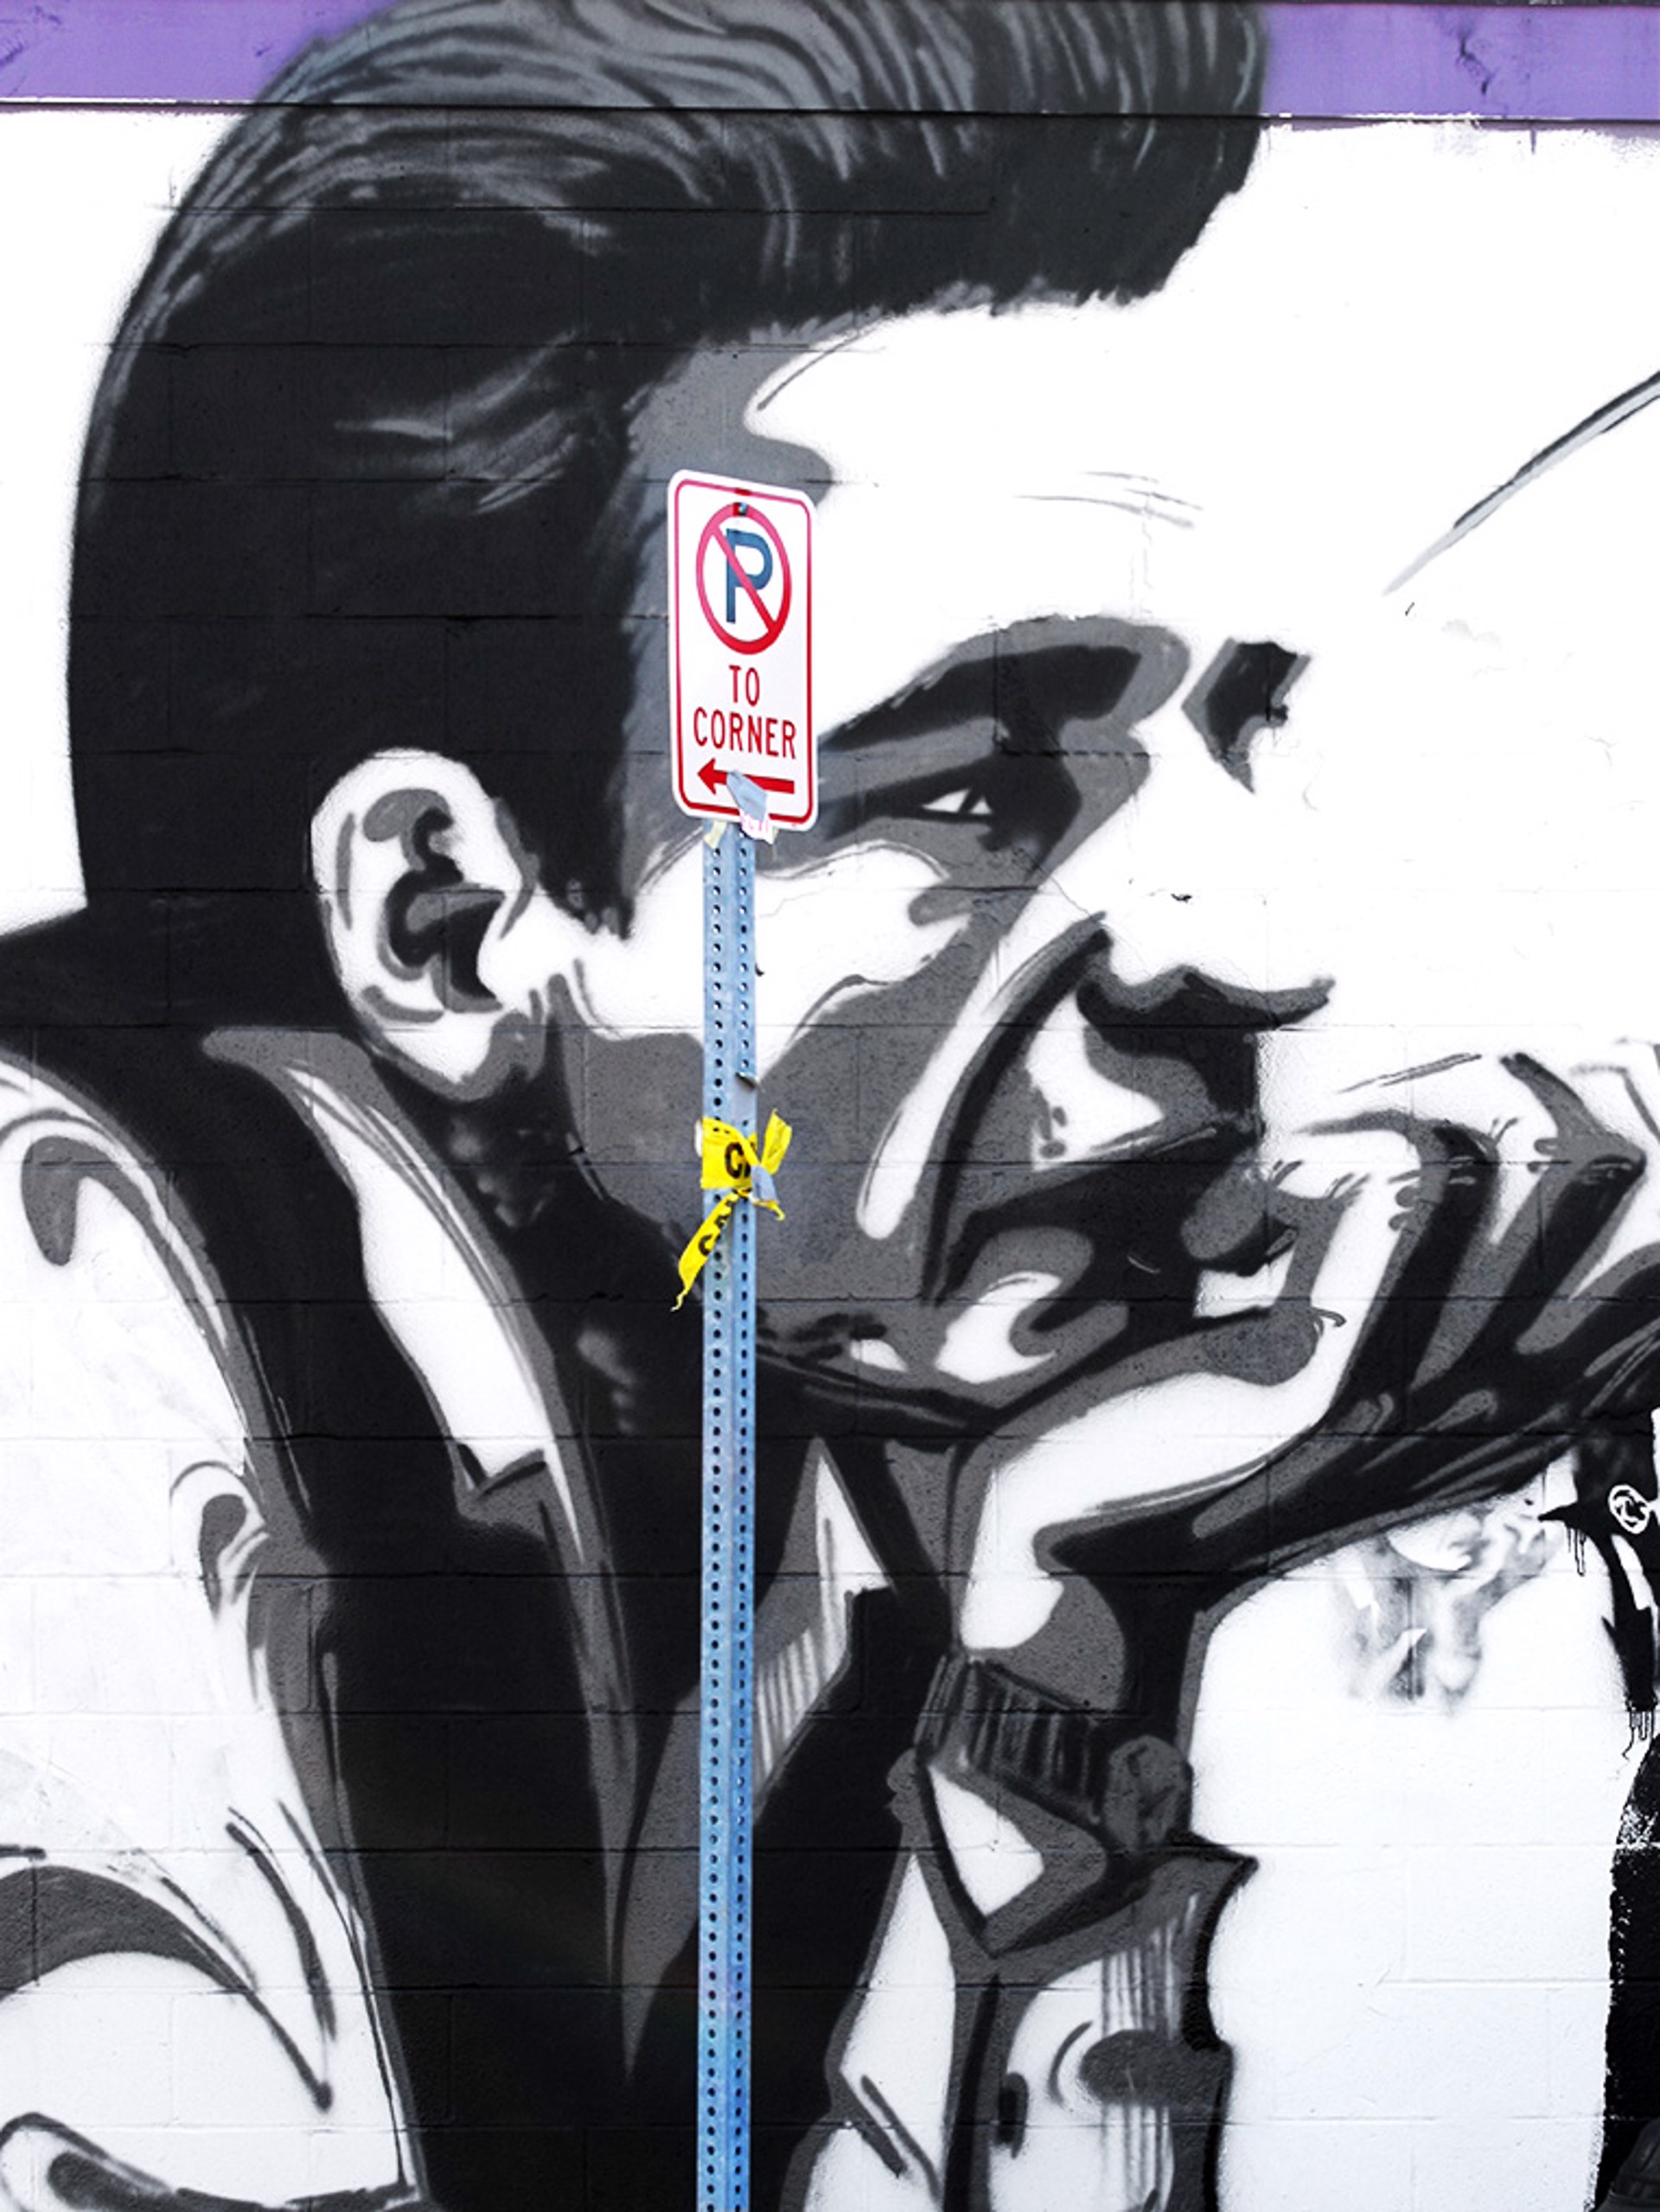 Johnny Cash and No Parking Sign by Jerry Park